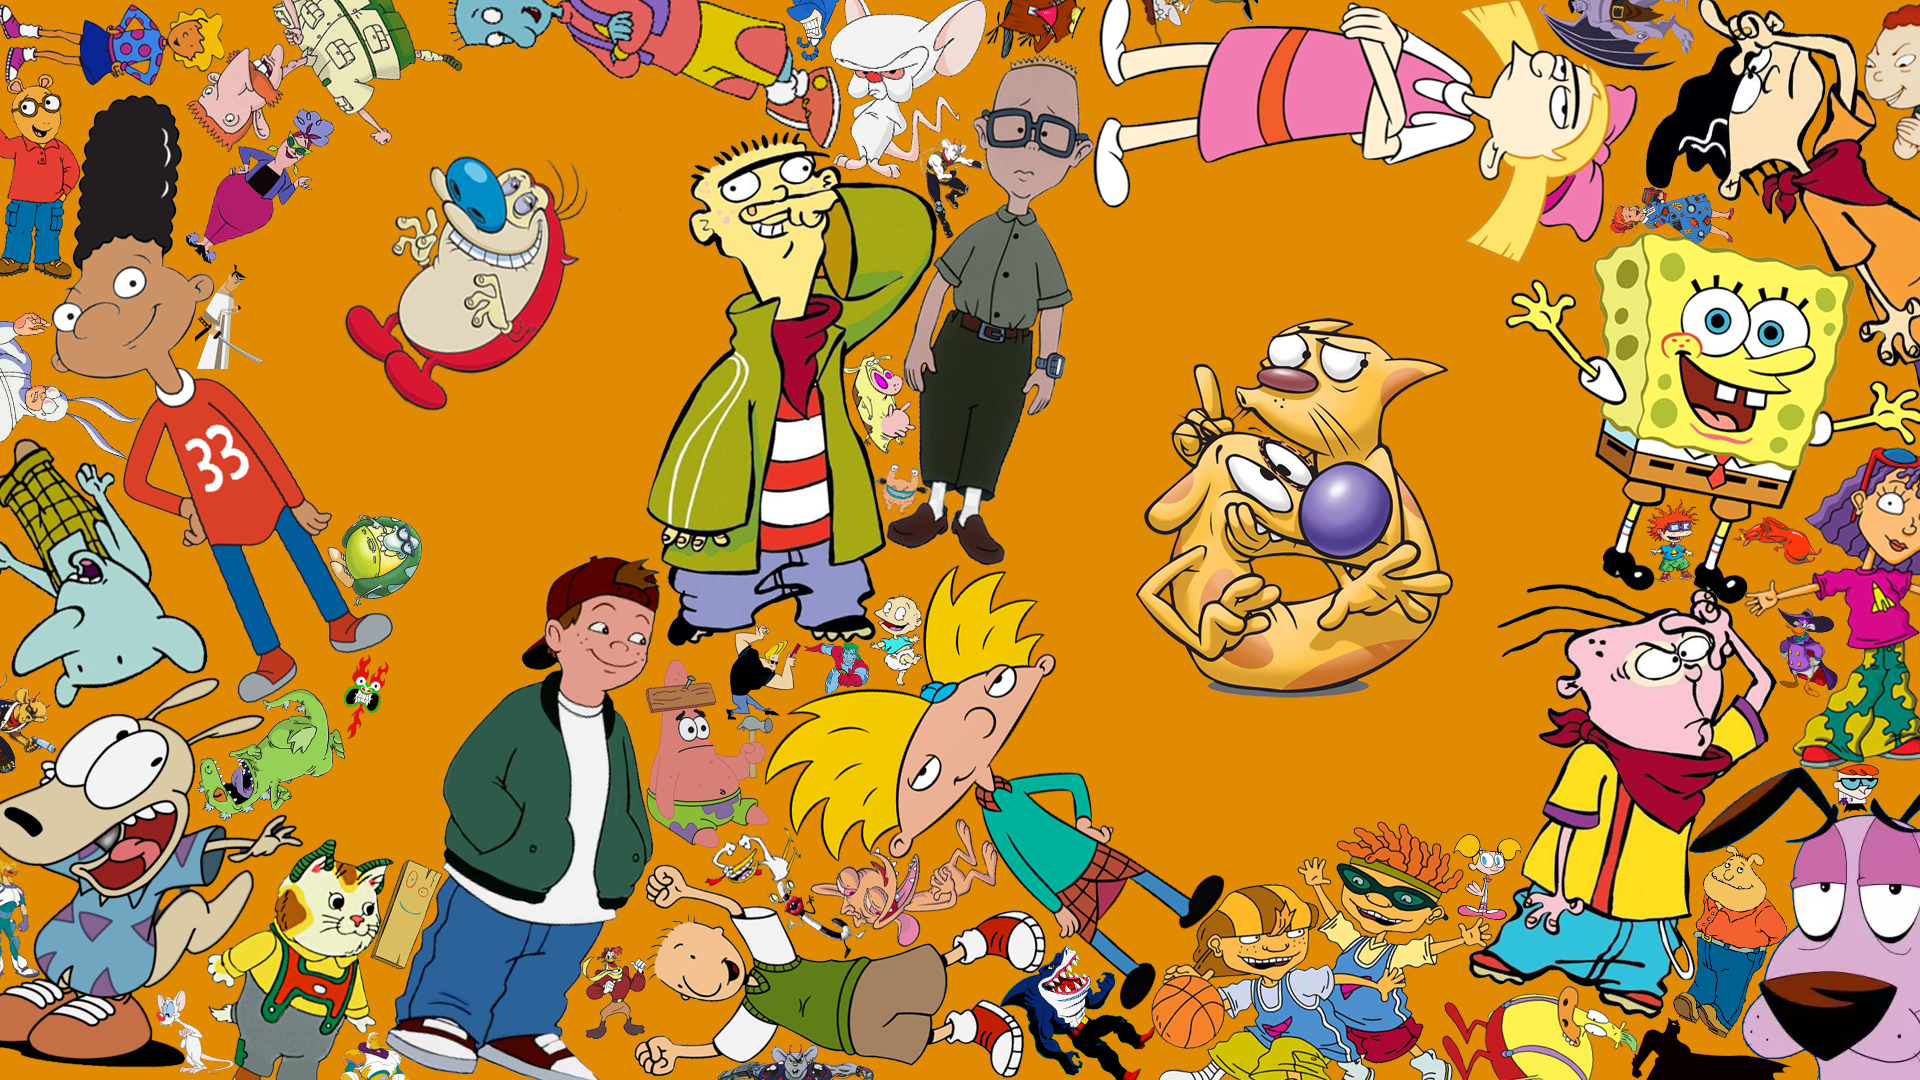 Top nickelodeon characters wallpaper HD Download Book Source for free download HD, 4K & high quality wallpaper